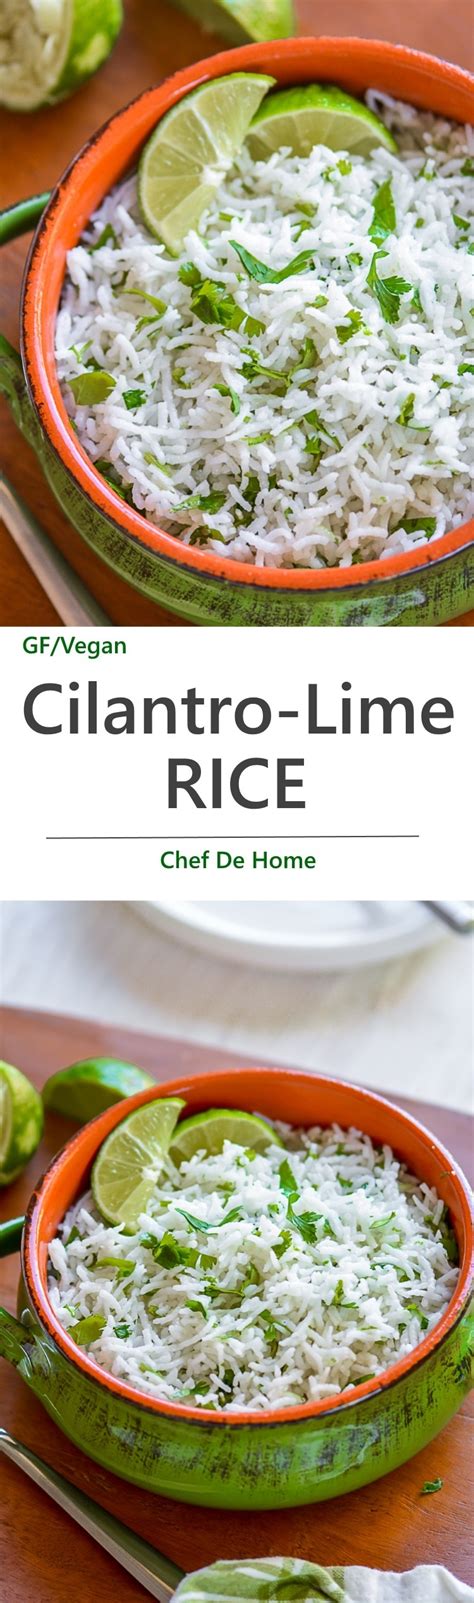 Ingredients · 1 cup minute® jasmine rice · 1 cube chicken bouillon, crushed · 1 tbsp vegetable oil · 1/4 cup onion, chopped · 1 clove garlic, minced · 1/2 tsp ground . Easy Cilantro Lime Rice Recipe | ChefDeHome.com